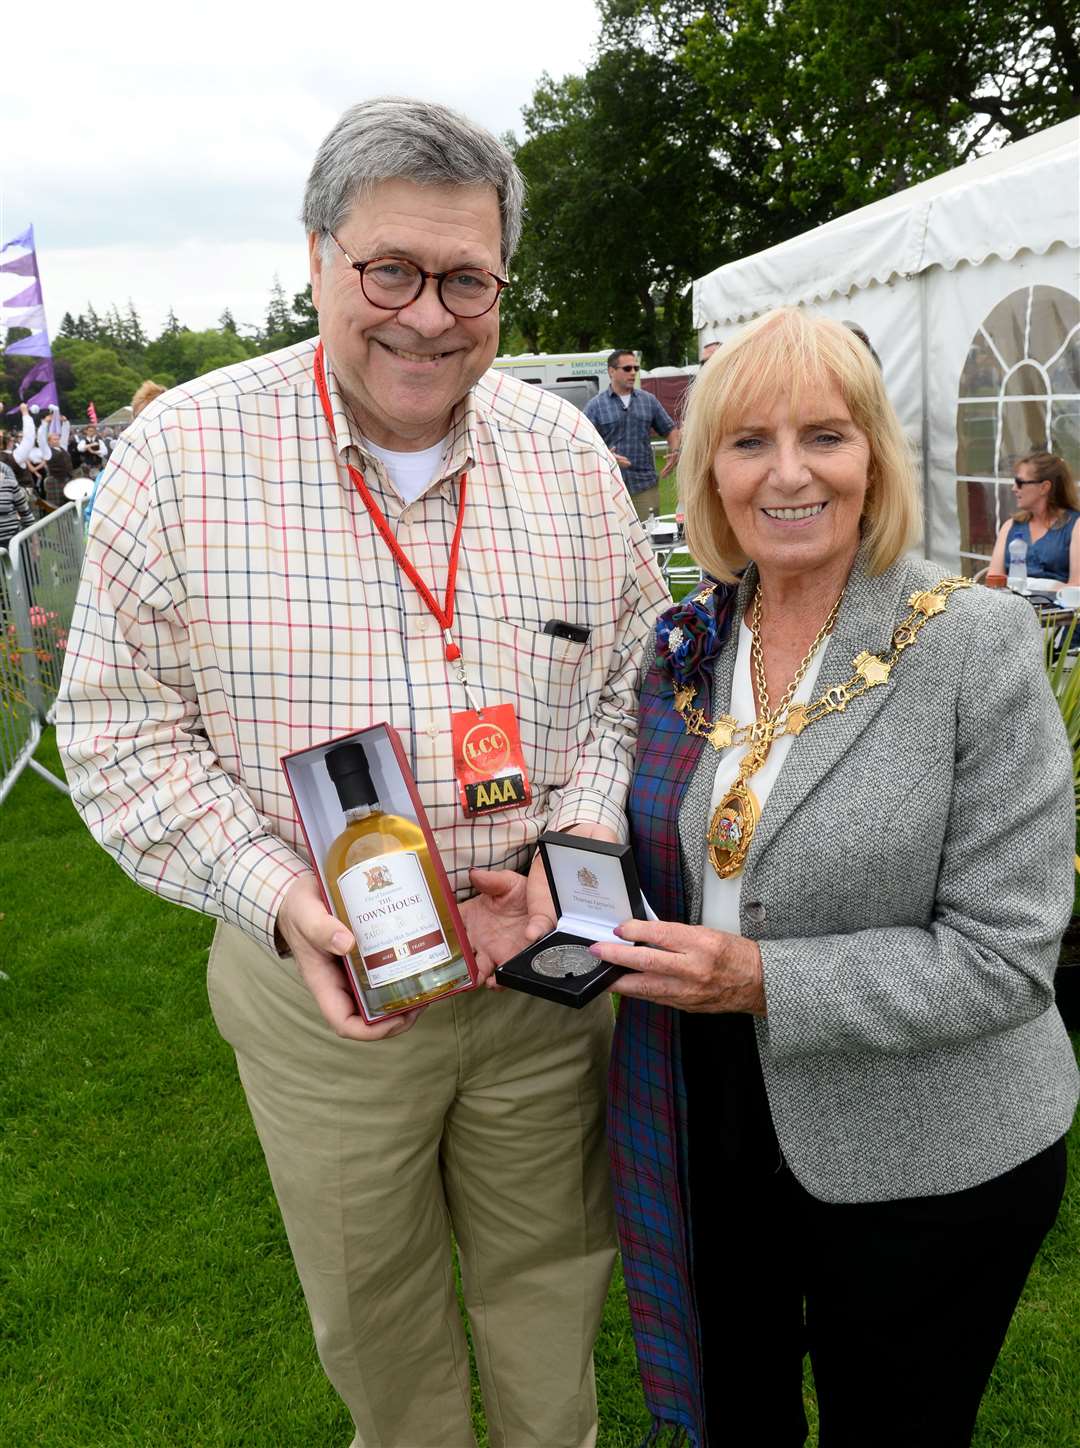 William Barr (United States Attorney General) surprise visitor along with 5 Secret service personal, a keen piper since the age of 6 and thoroughly enjoying the days events, with Provost Helen Carmichael who presented him with a Bottle of Inverness Town House 11 year old Malt Whiskey. Picture: Alasdair Allen